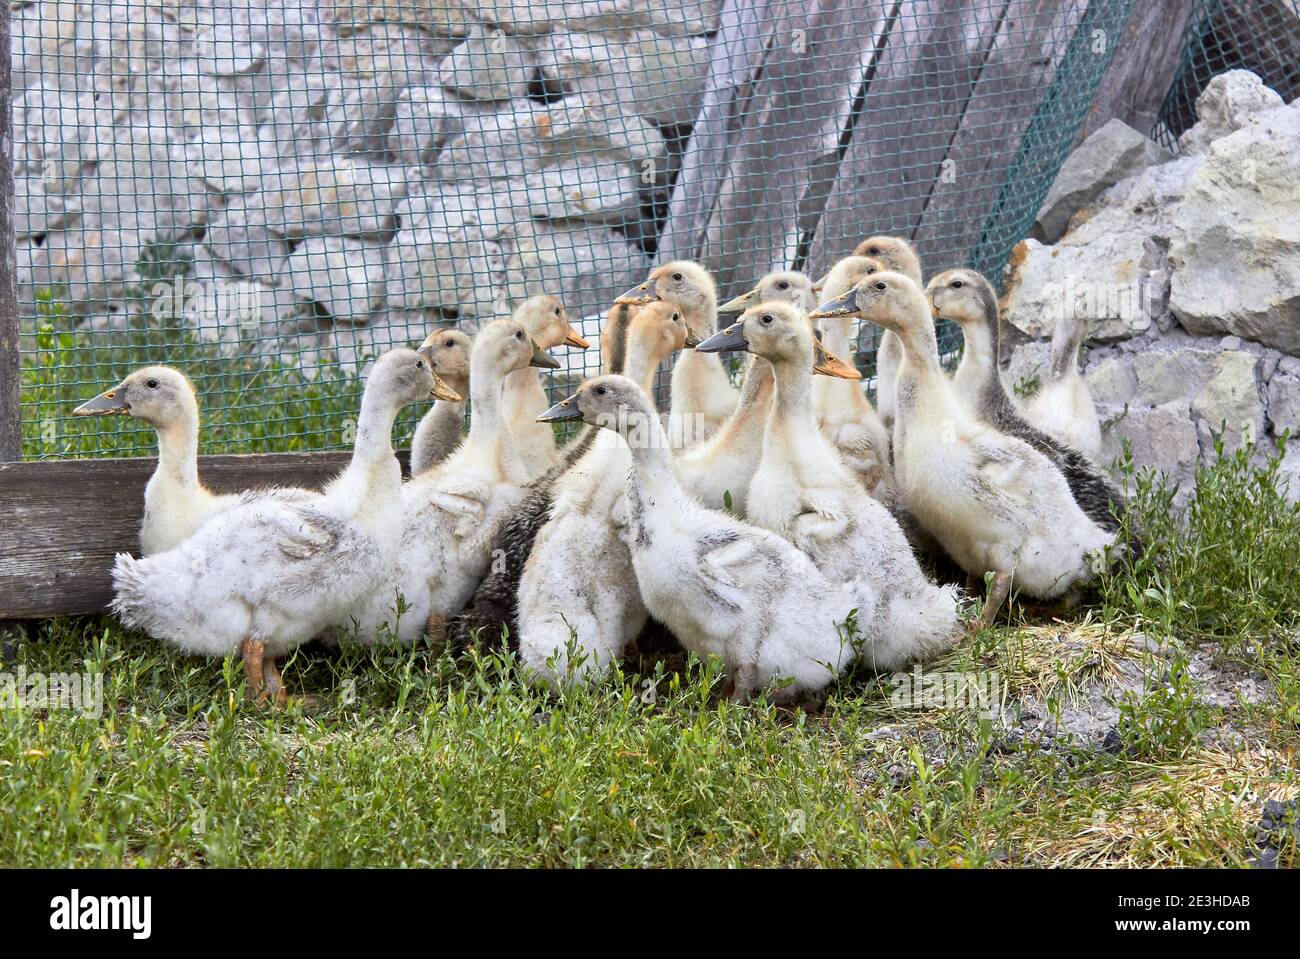 A small group of white and gray domestic ducks with outstretched necks on green grass, raised on a small farm. Stock Photo